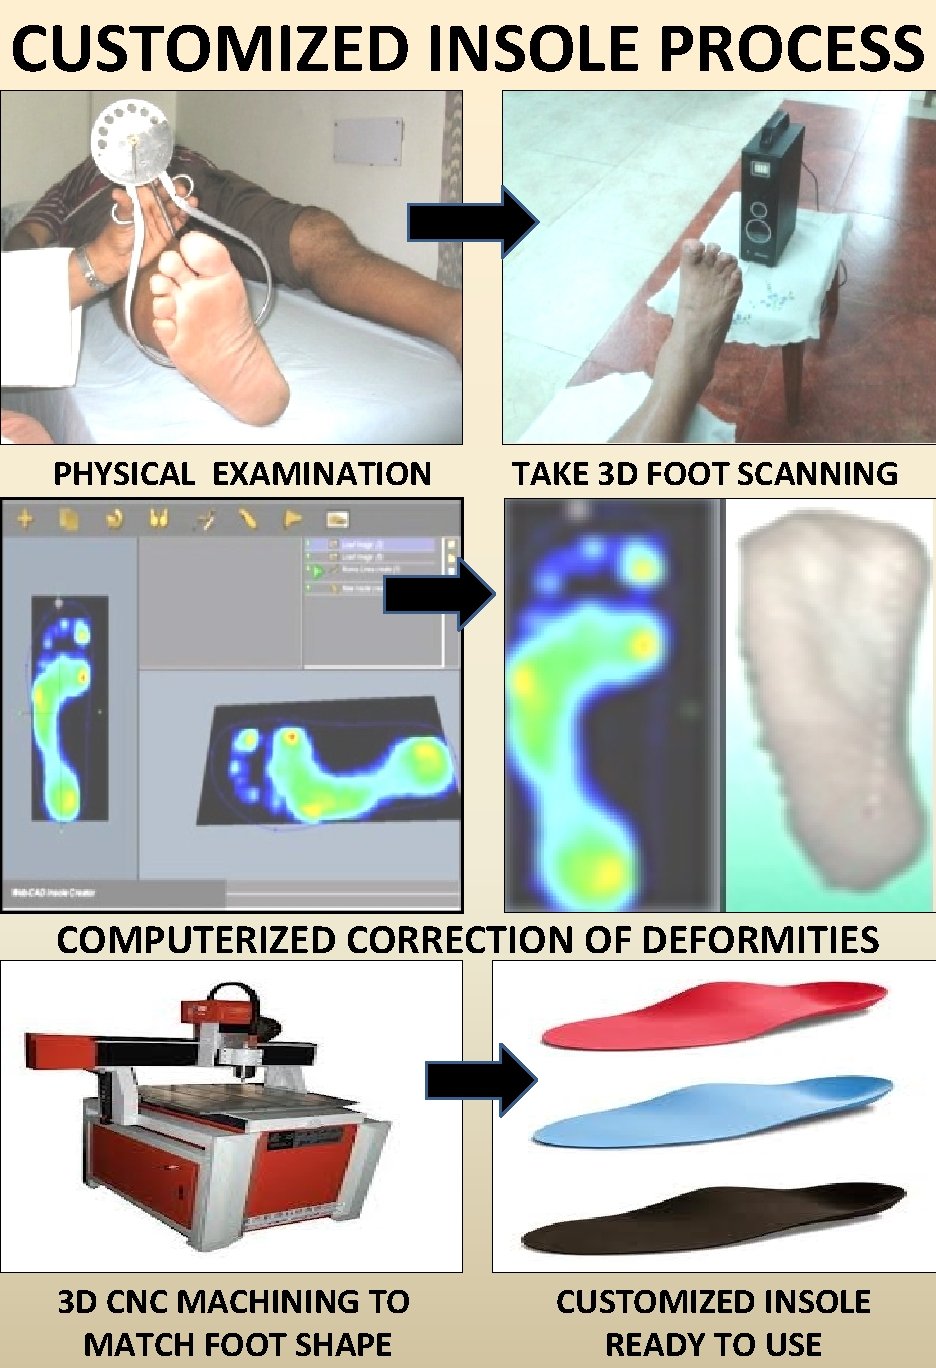 CUSTOMIZED INSOLE PROCESS PHYSICAL EXAMINATION TAKE 3 D FOOT SCANNING COMPUTERIZED CORRECTION OF DEFORMITIES